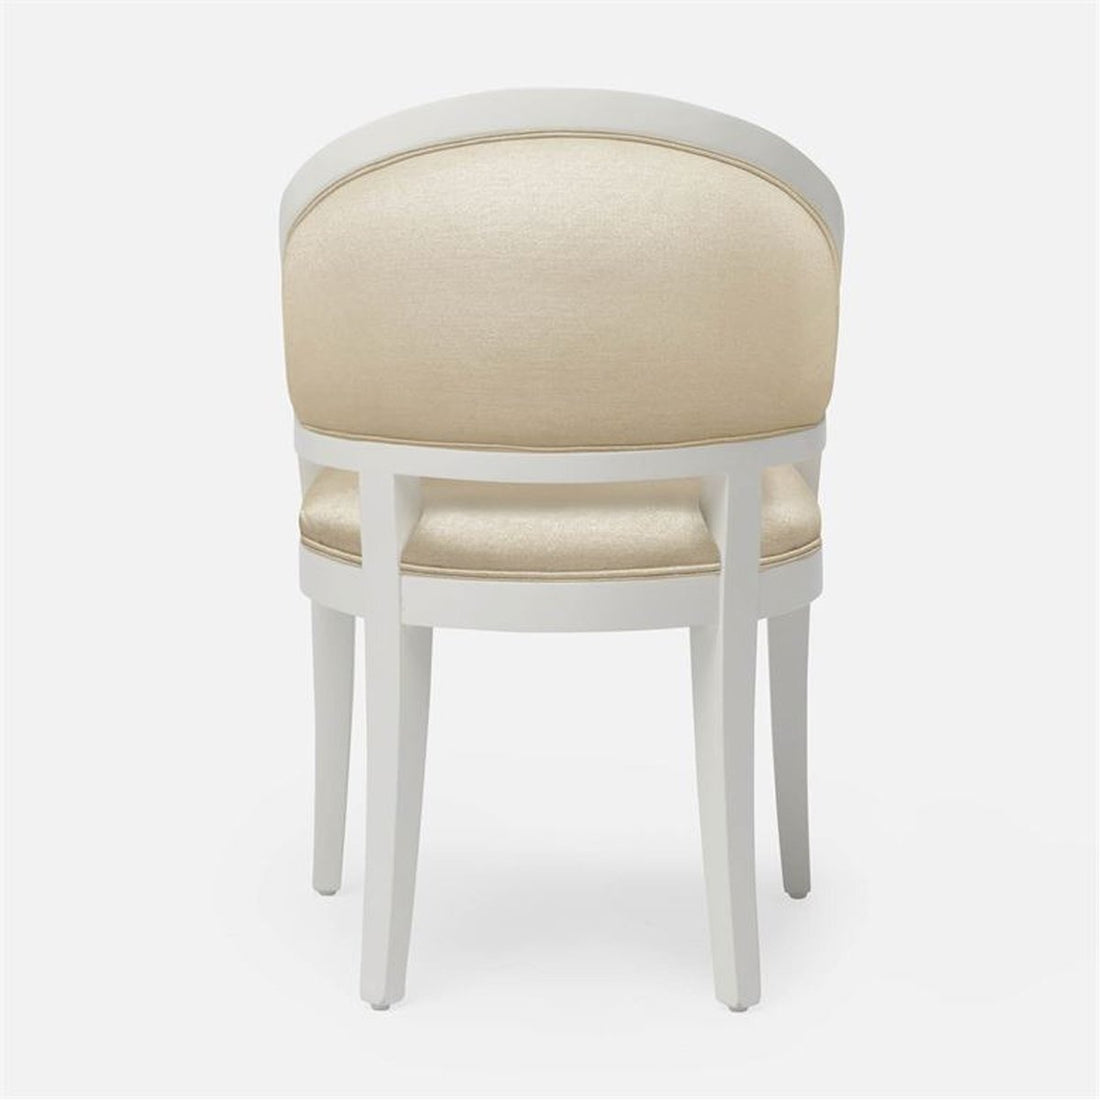 Made Goods Sylvie Curved Back Dining Chair, Arno Fabric